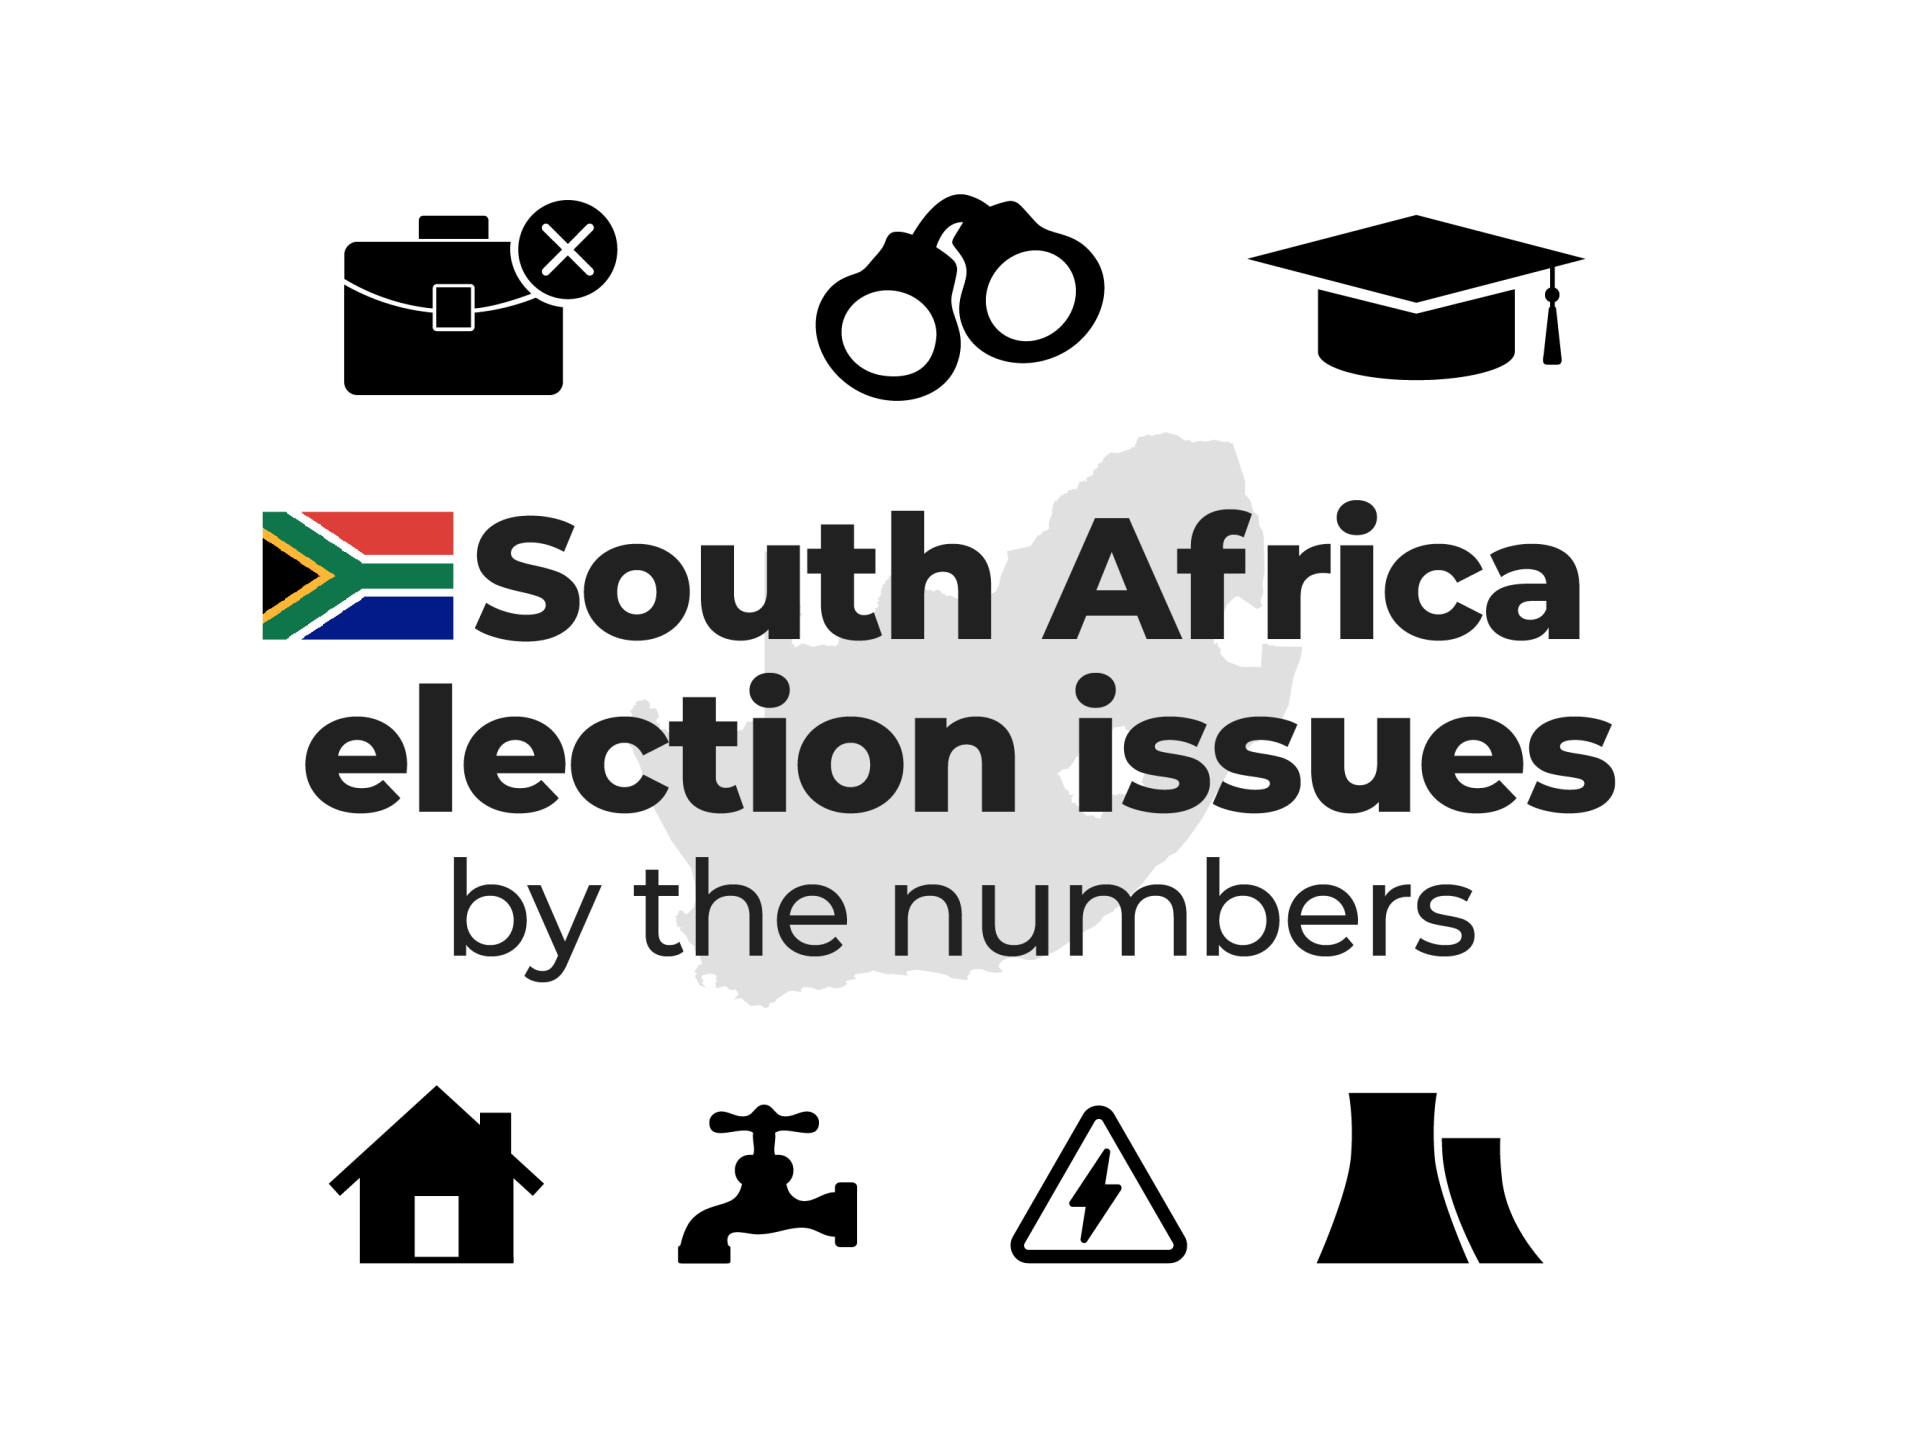 INTERACTIVE-South-Africa-election-issues-by-the-numbers-1716889712.png